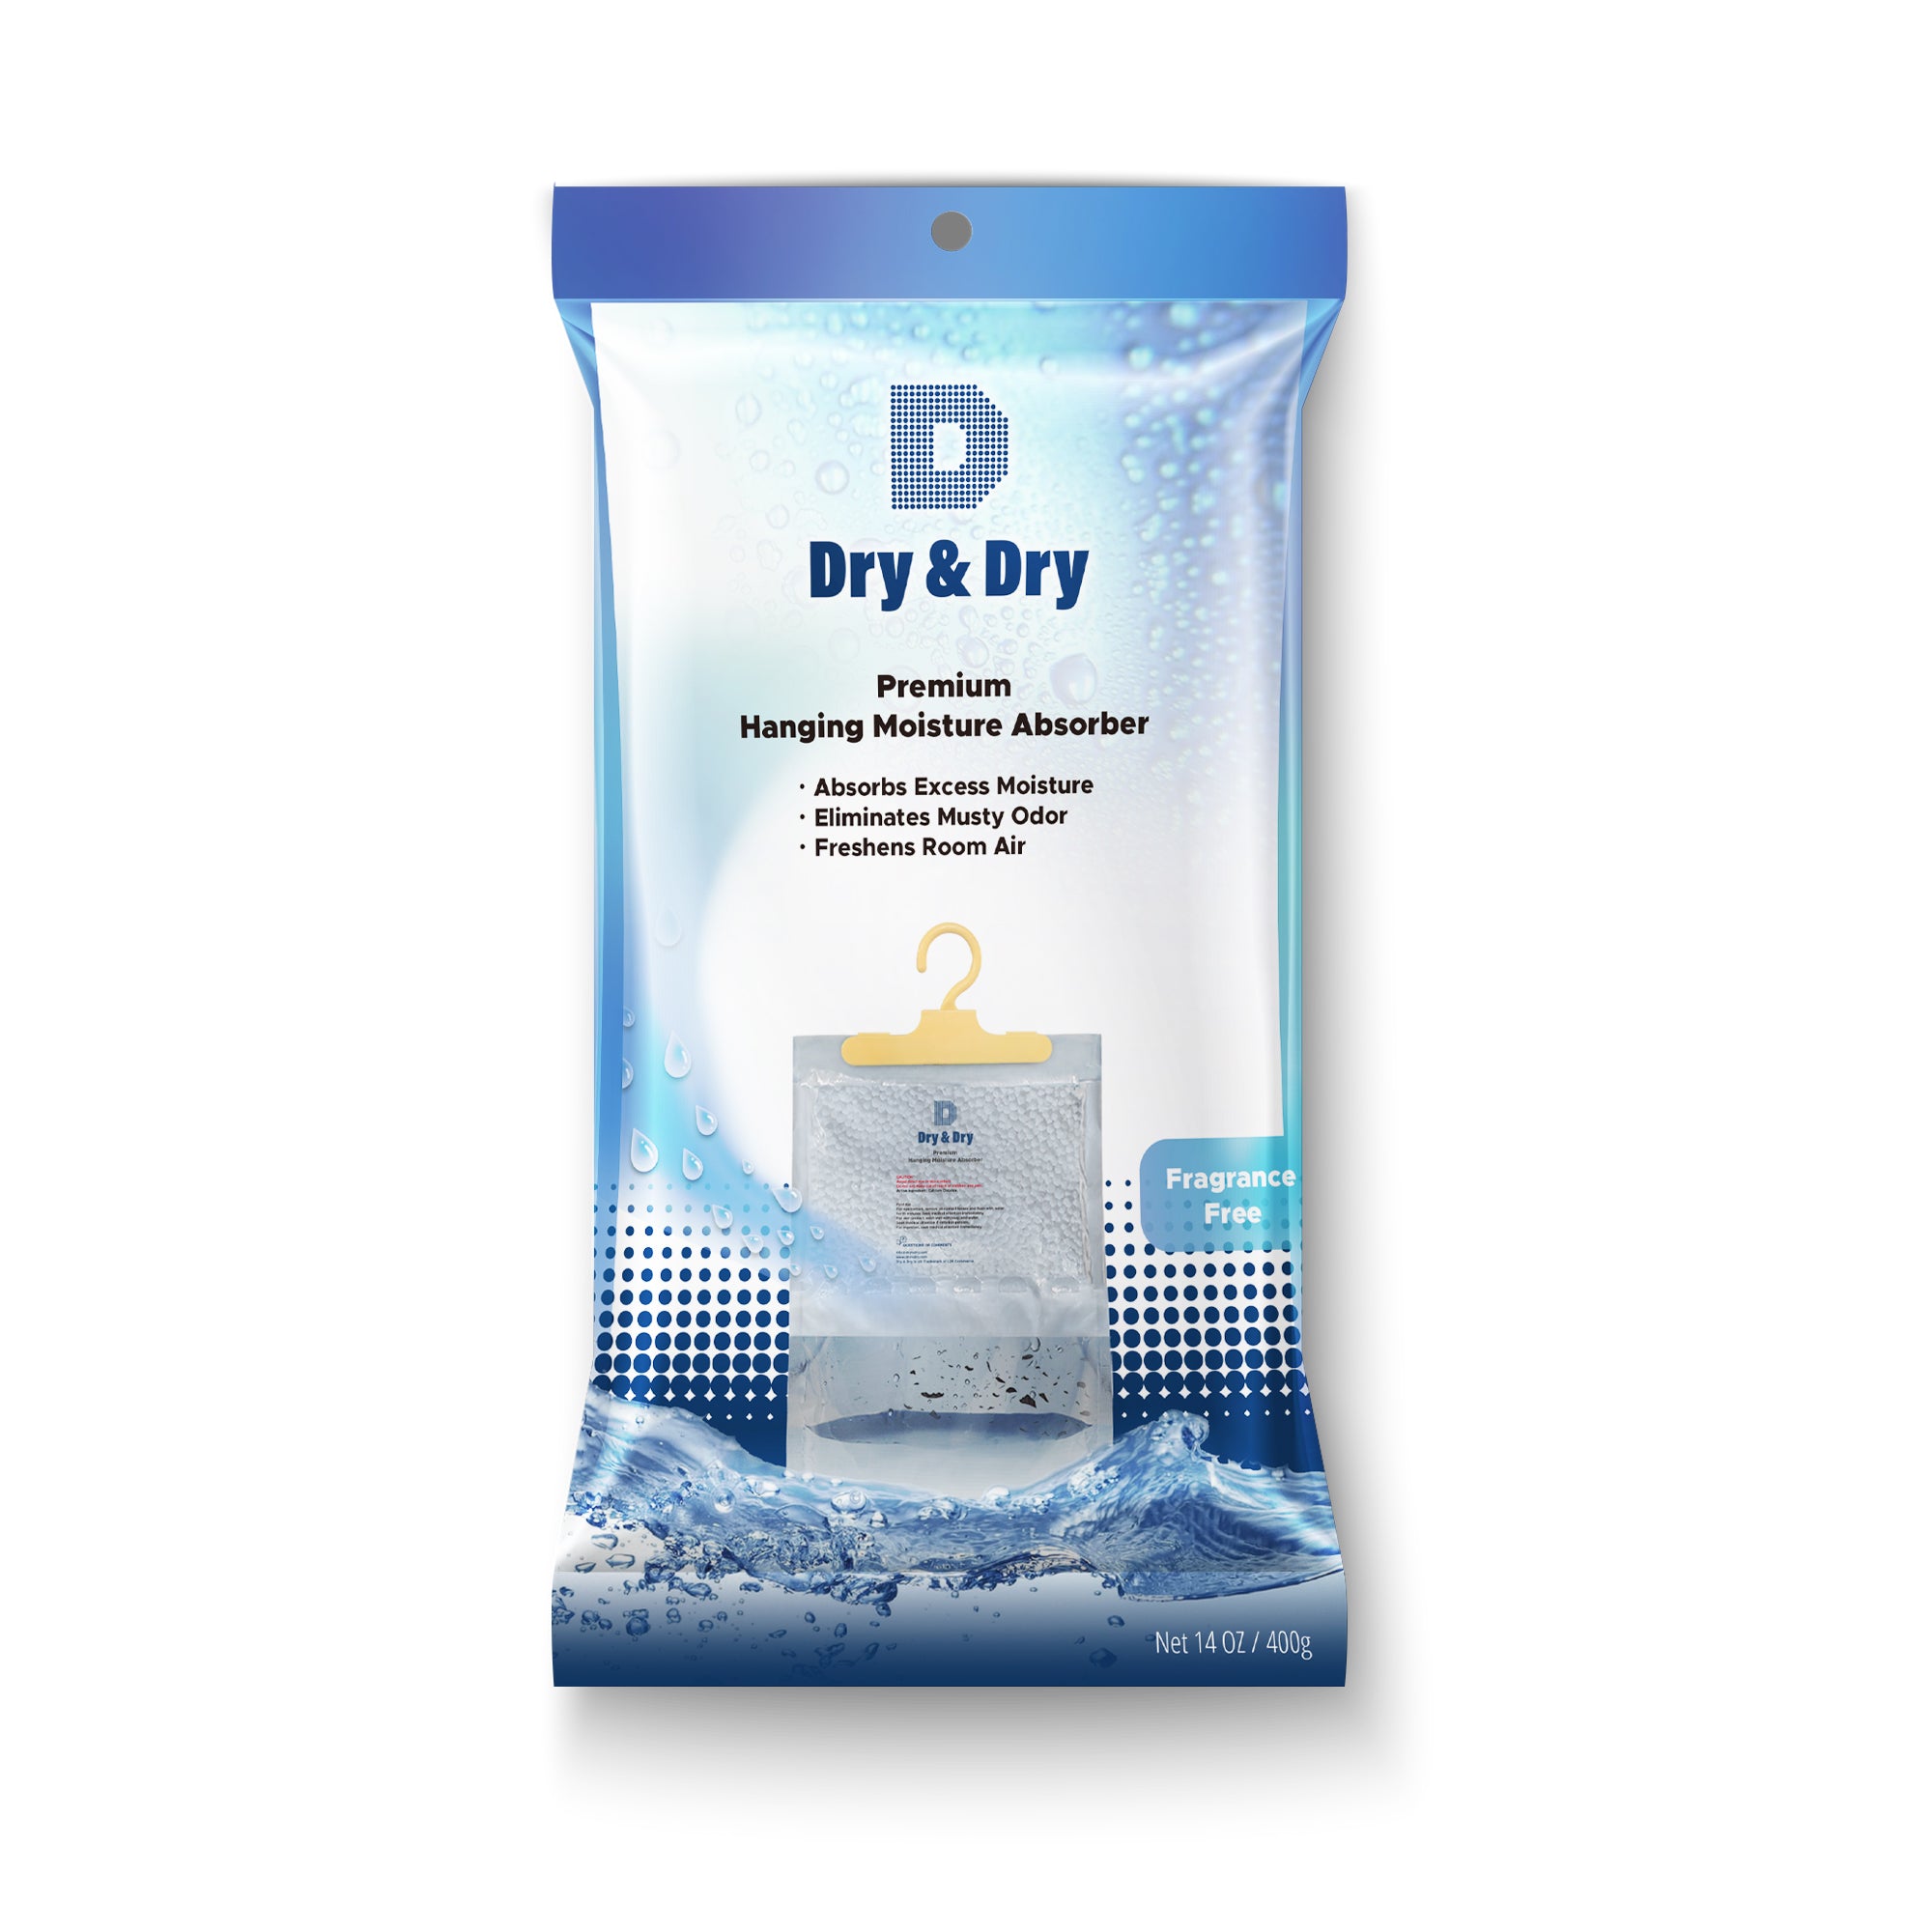 [92 pack] [Net 14.1 oz/Pack]  “Dry & Dry” Premium Hanging Moisture Absorber to Control Excess Moisture for Basements, Bathrooms, Laundry Rooms, and Enclosed Spaces